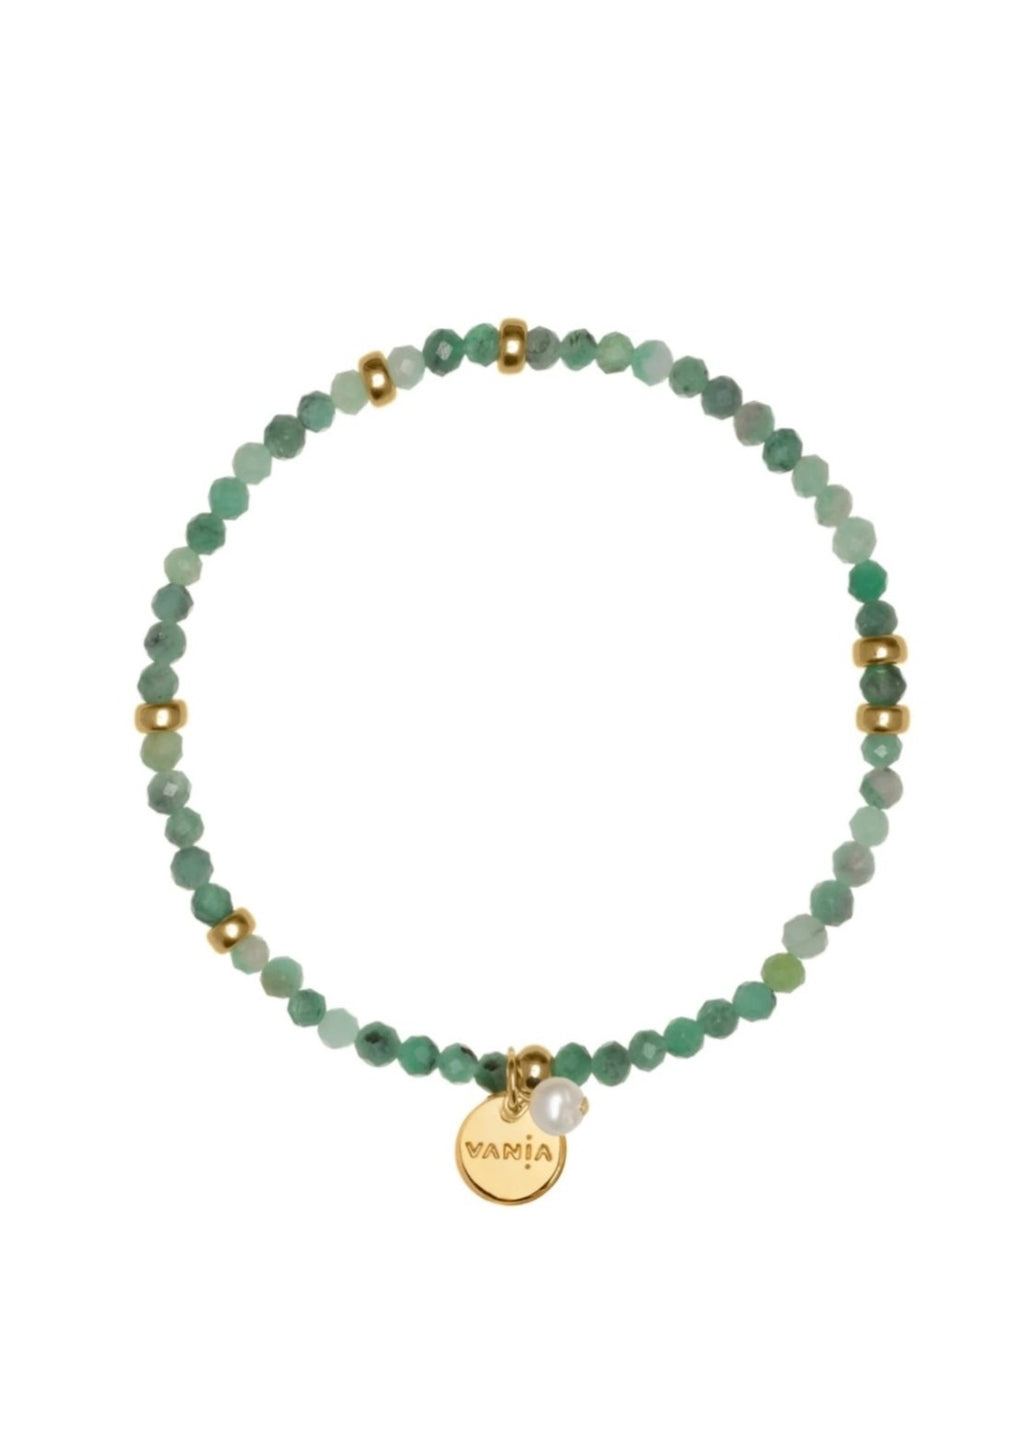 Magic Trip - Gleaming Emerald Bracelet, by Vania Crafted to enchant, each emerald bead is a whisper of nature's beauty. The delicate addition of the freshwater pearl charm adds a touch of sophistication.  Handcrafted with meticulous care in New Zealand.